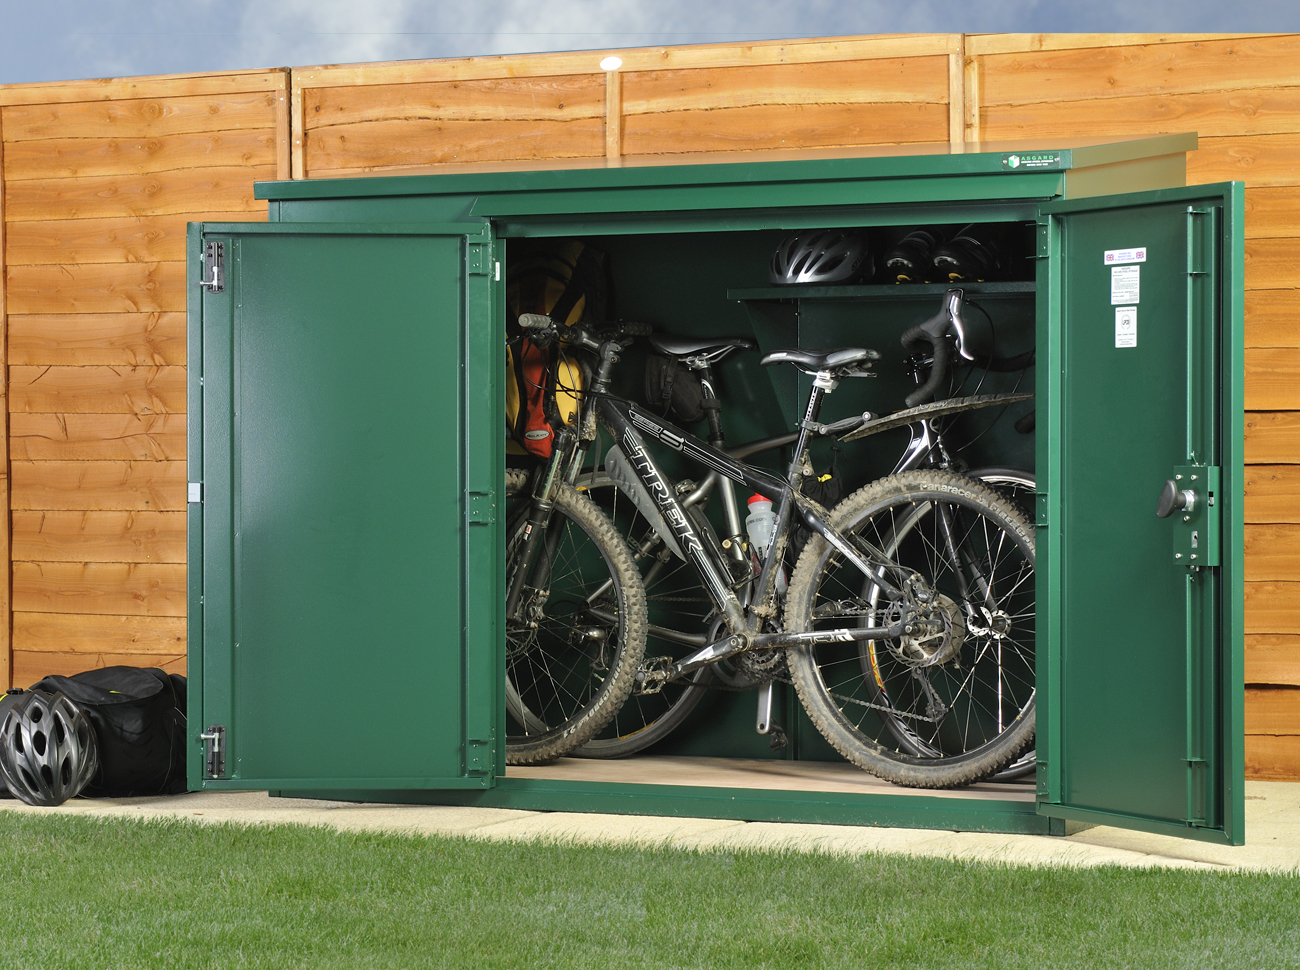 Annexe insurance approved and police approved bike shed